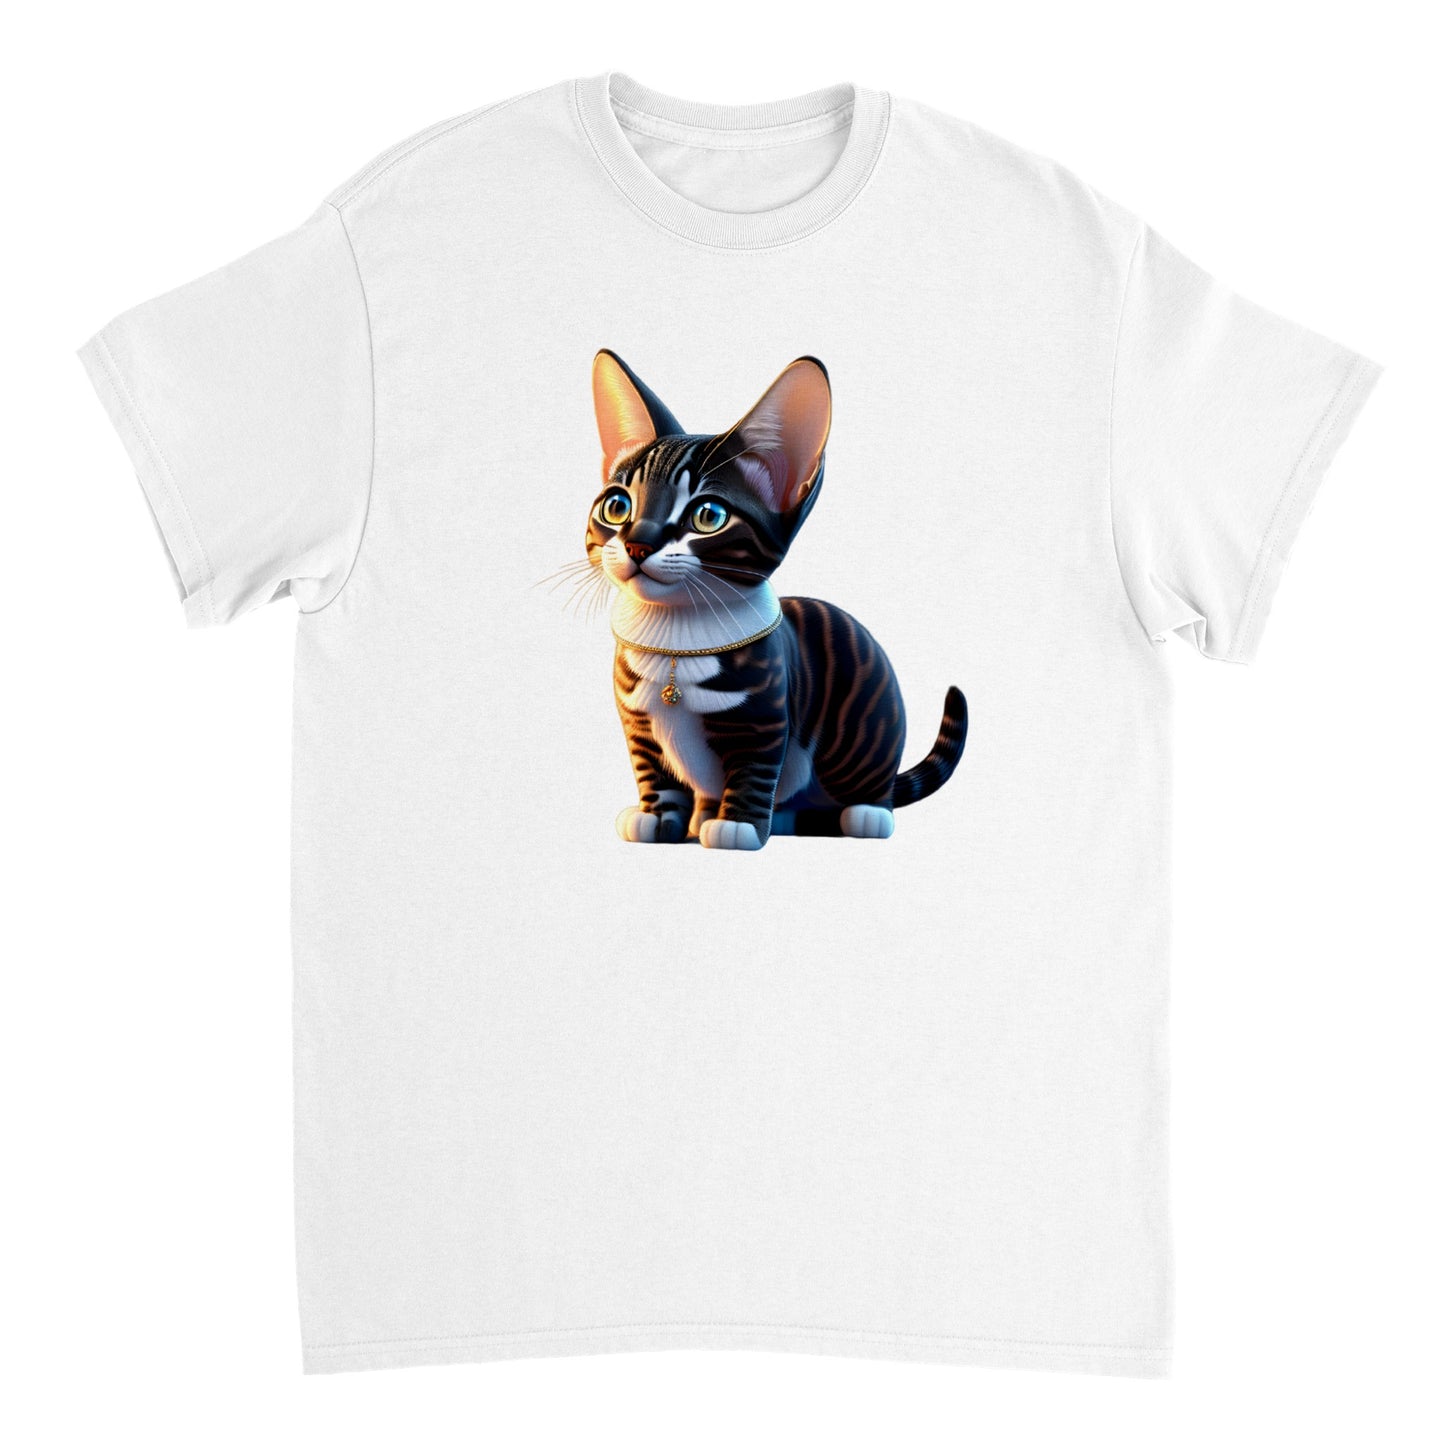 Adorable, Cool, Cute Cats and Kittens Toy - Heavyweight Unisex Crewneck T-shirt 25